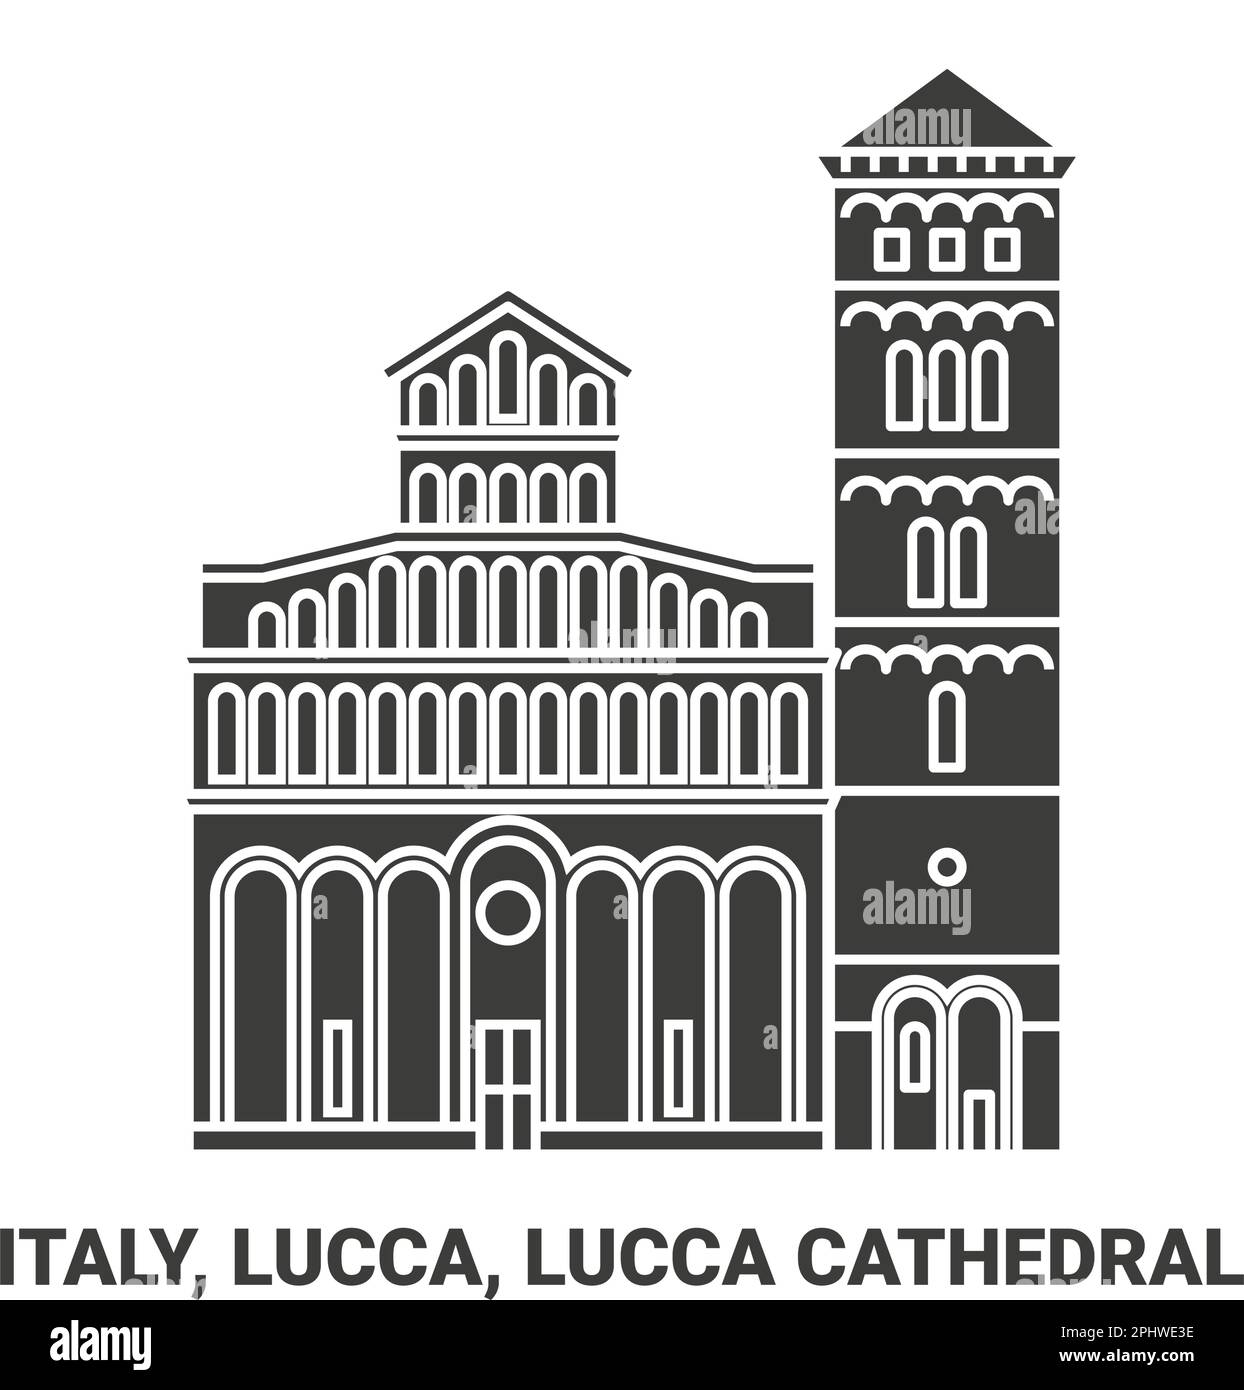 Italy, Lucca, Lucca Cathedral travel landmark vector illustration Stock Vector